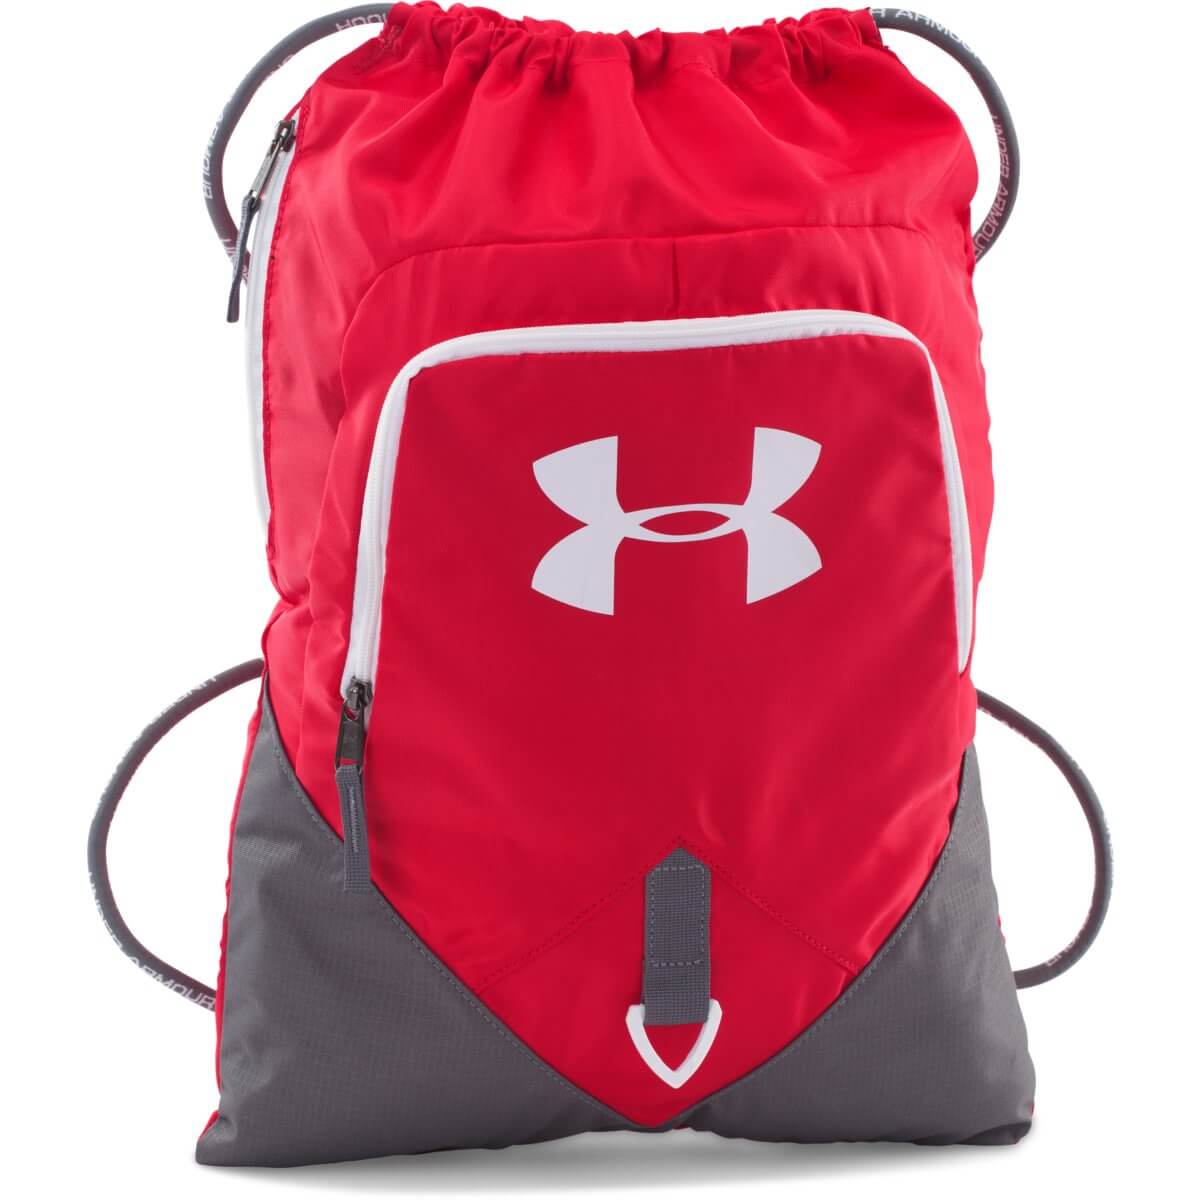 Undeniable Sackpack Red - Under Armour - Red